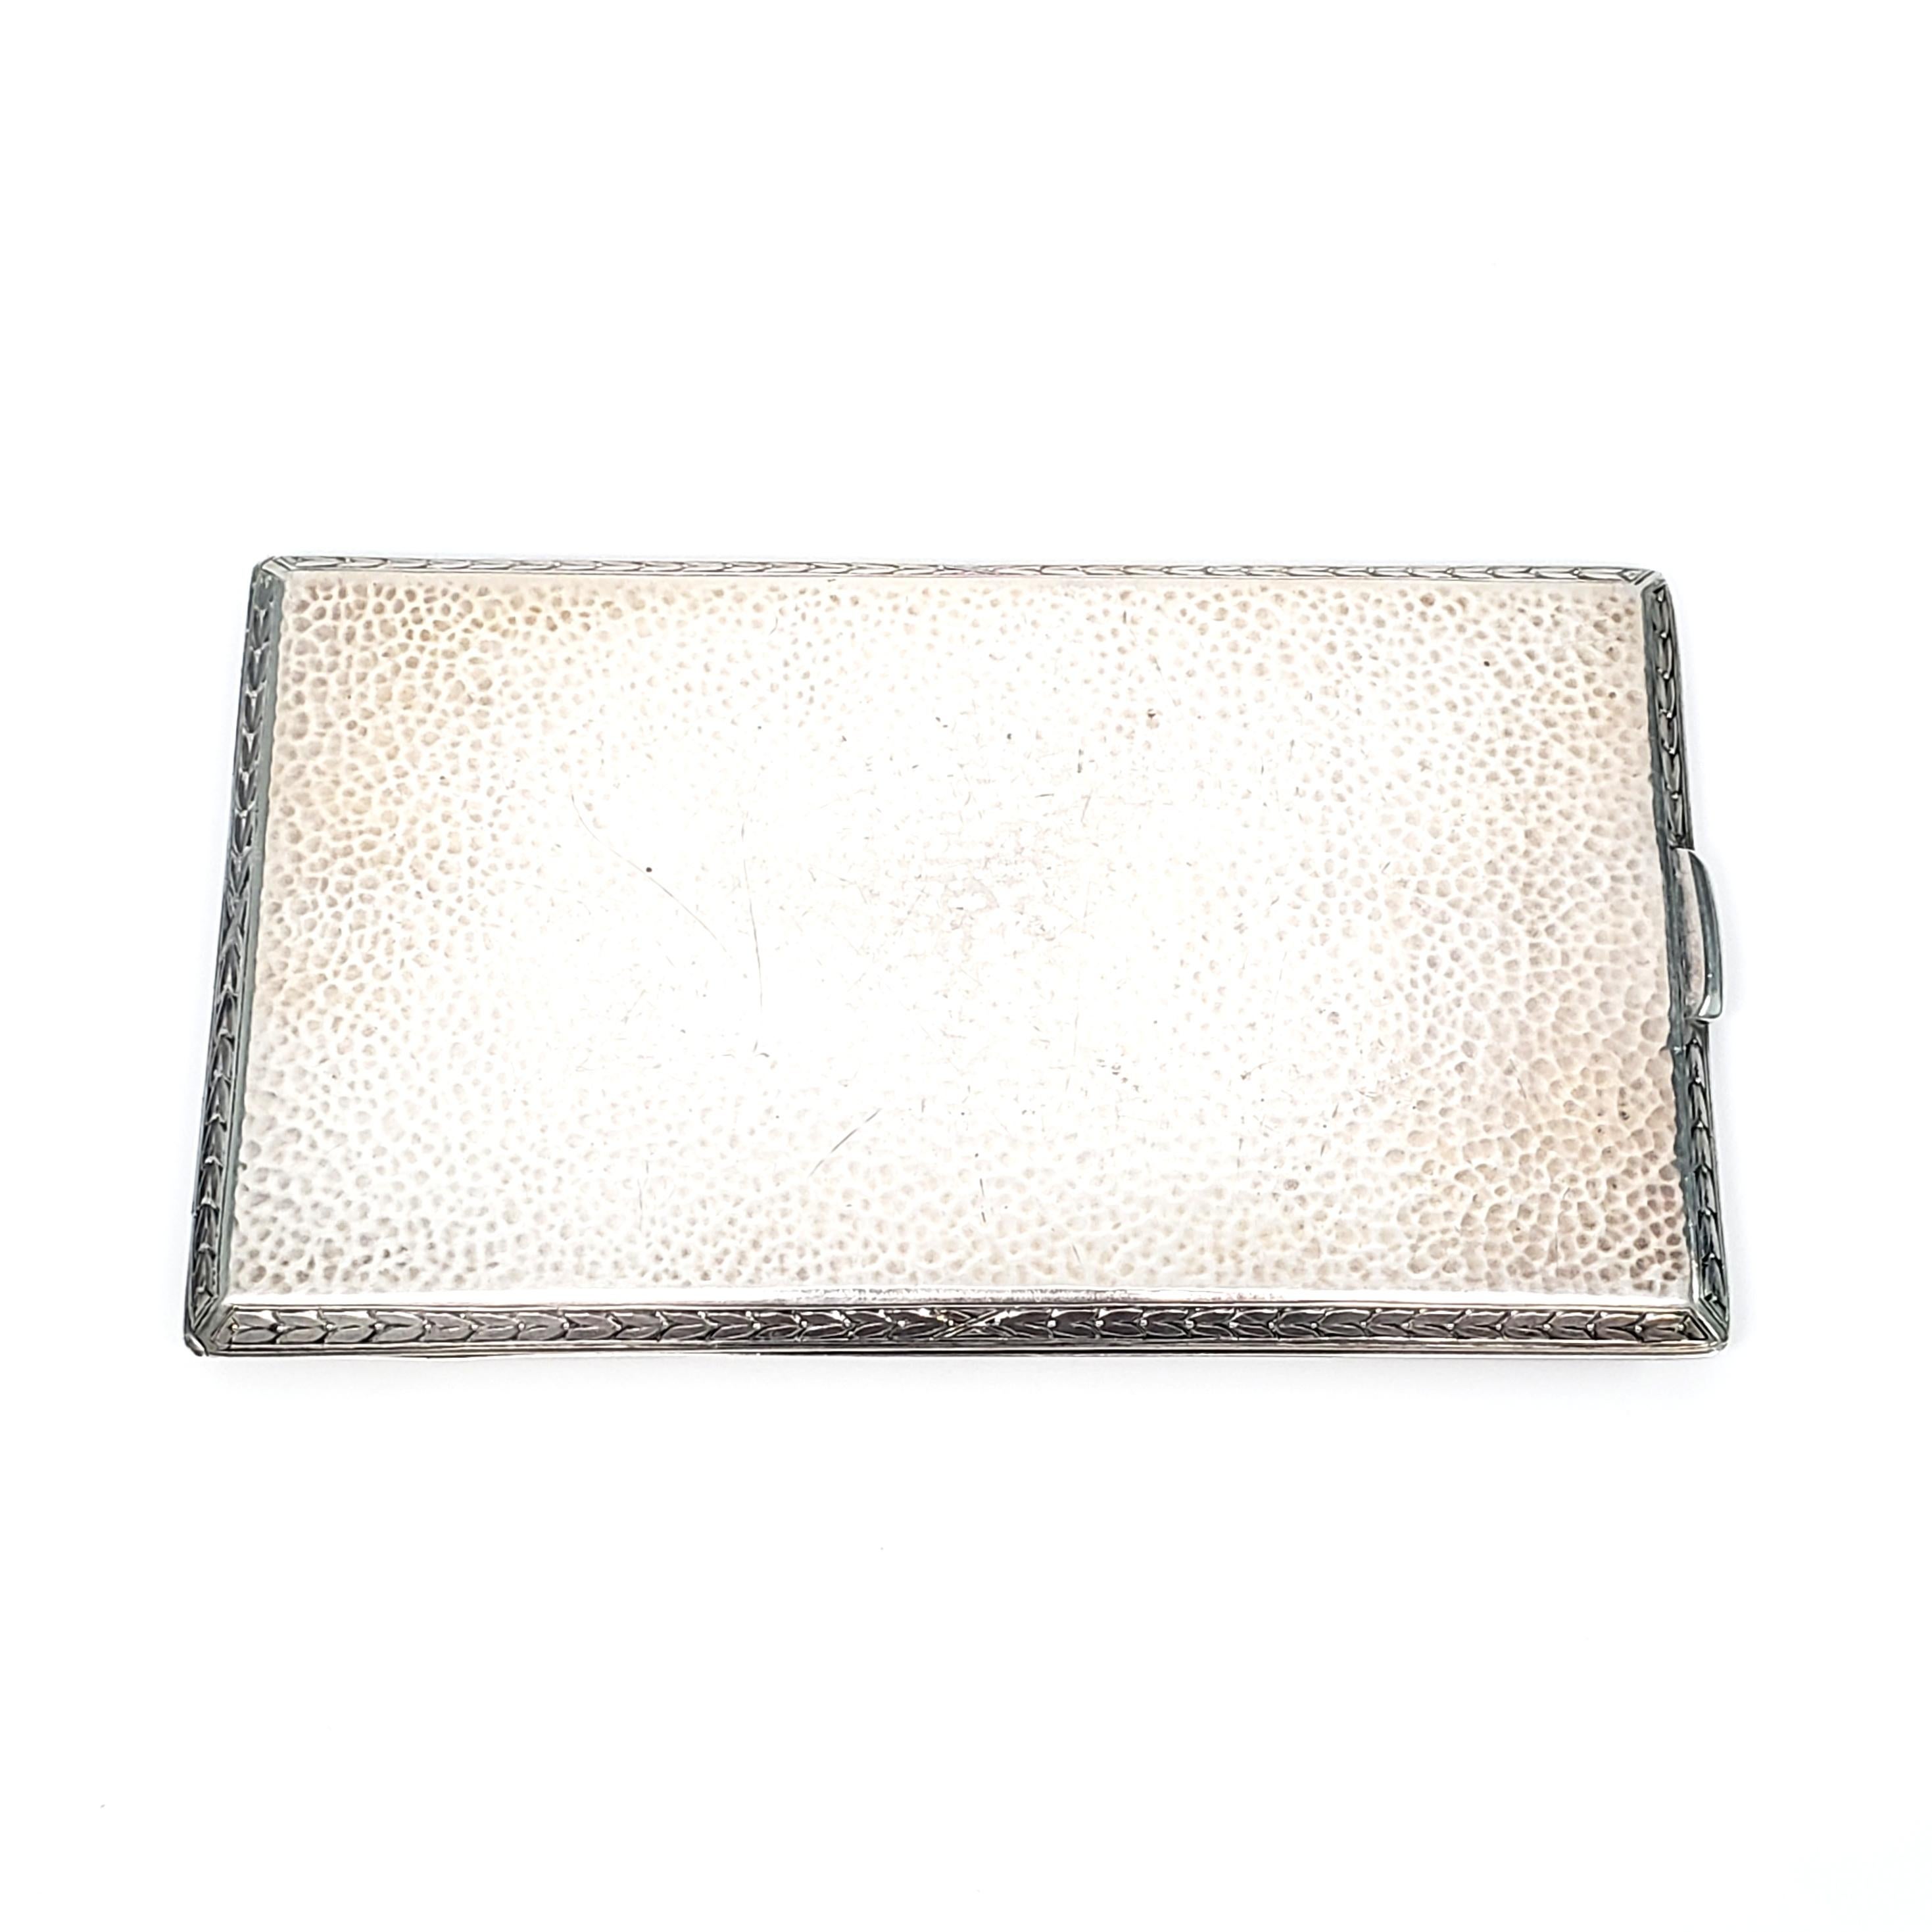 Antique sterling silver large/long cigarette case by R Blackinton & Co.

This beautiful piece features a hammered design on both sides with a leaf-like frame design and a gold gilt interior with a spring arm. It has a well functioning push button